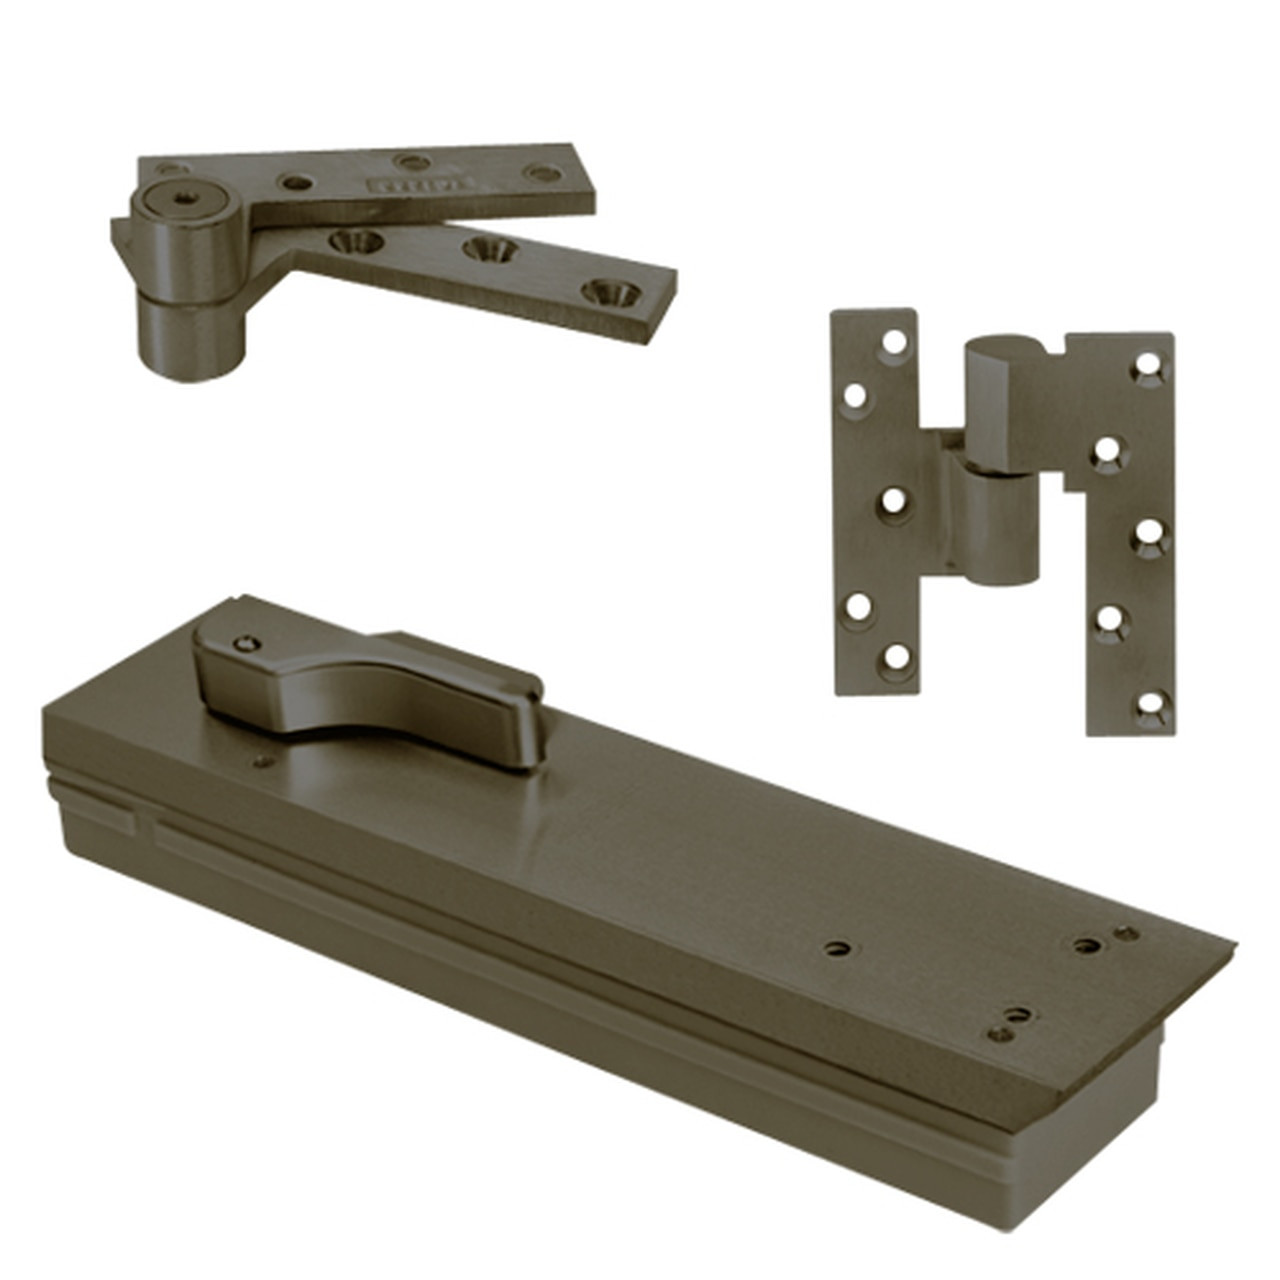 FQ5105NBC-SC-LH-613 Rixson Q51 Series Fire Rated 3/4" Offset Hung Shallow Depth Floor Closers in Dark Bronze Finish